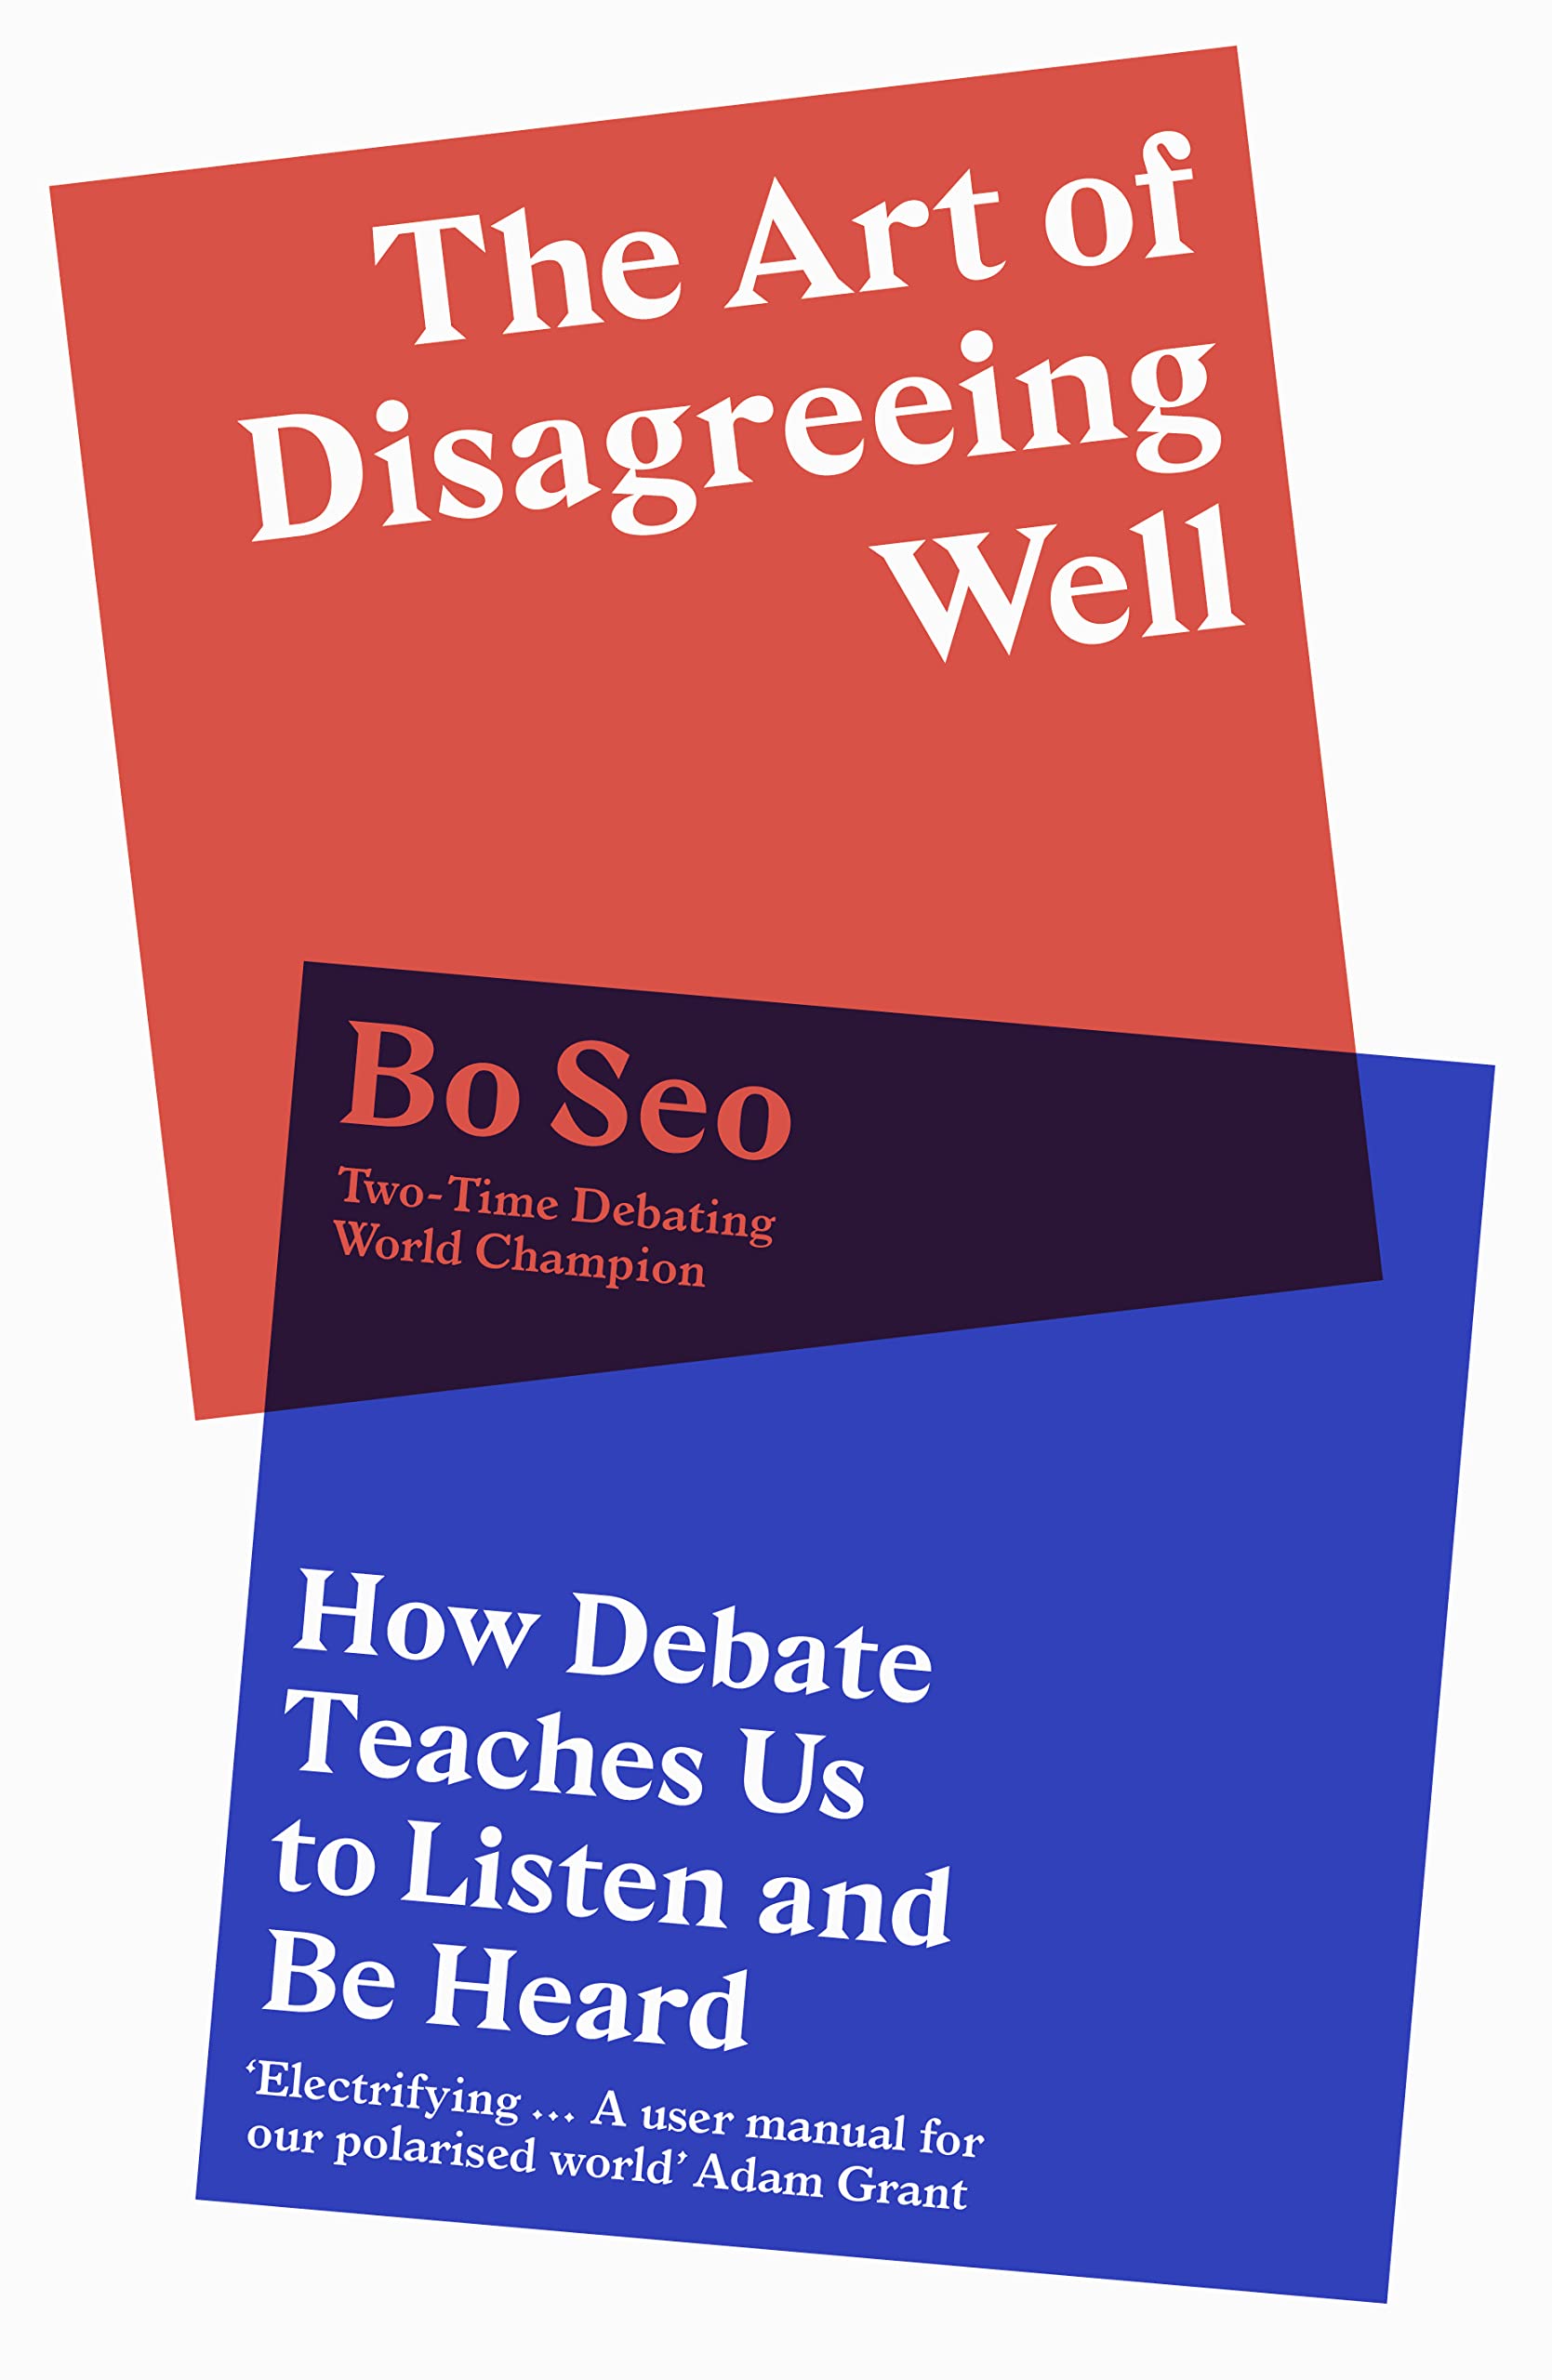 The Art Of Disagreeing Well